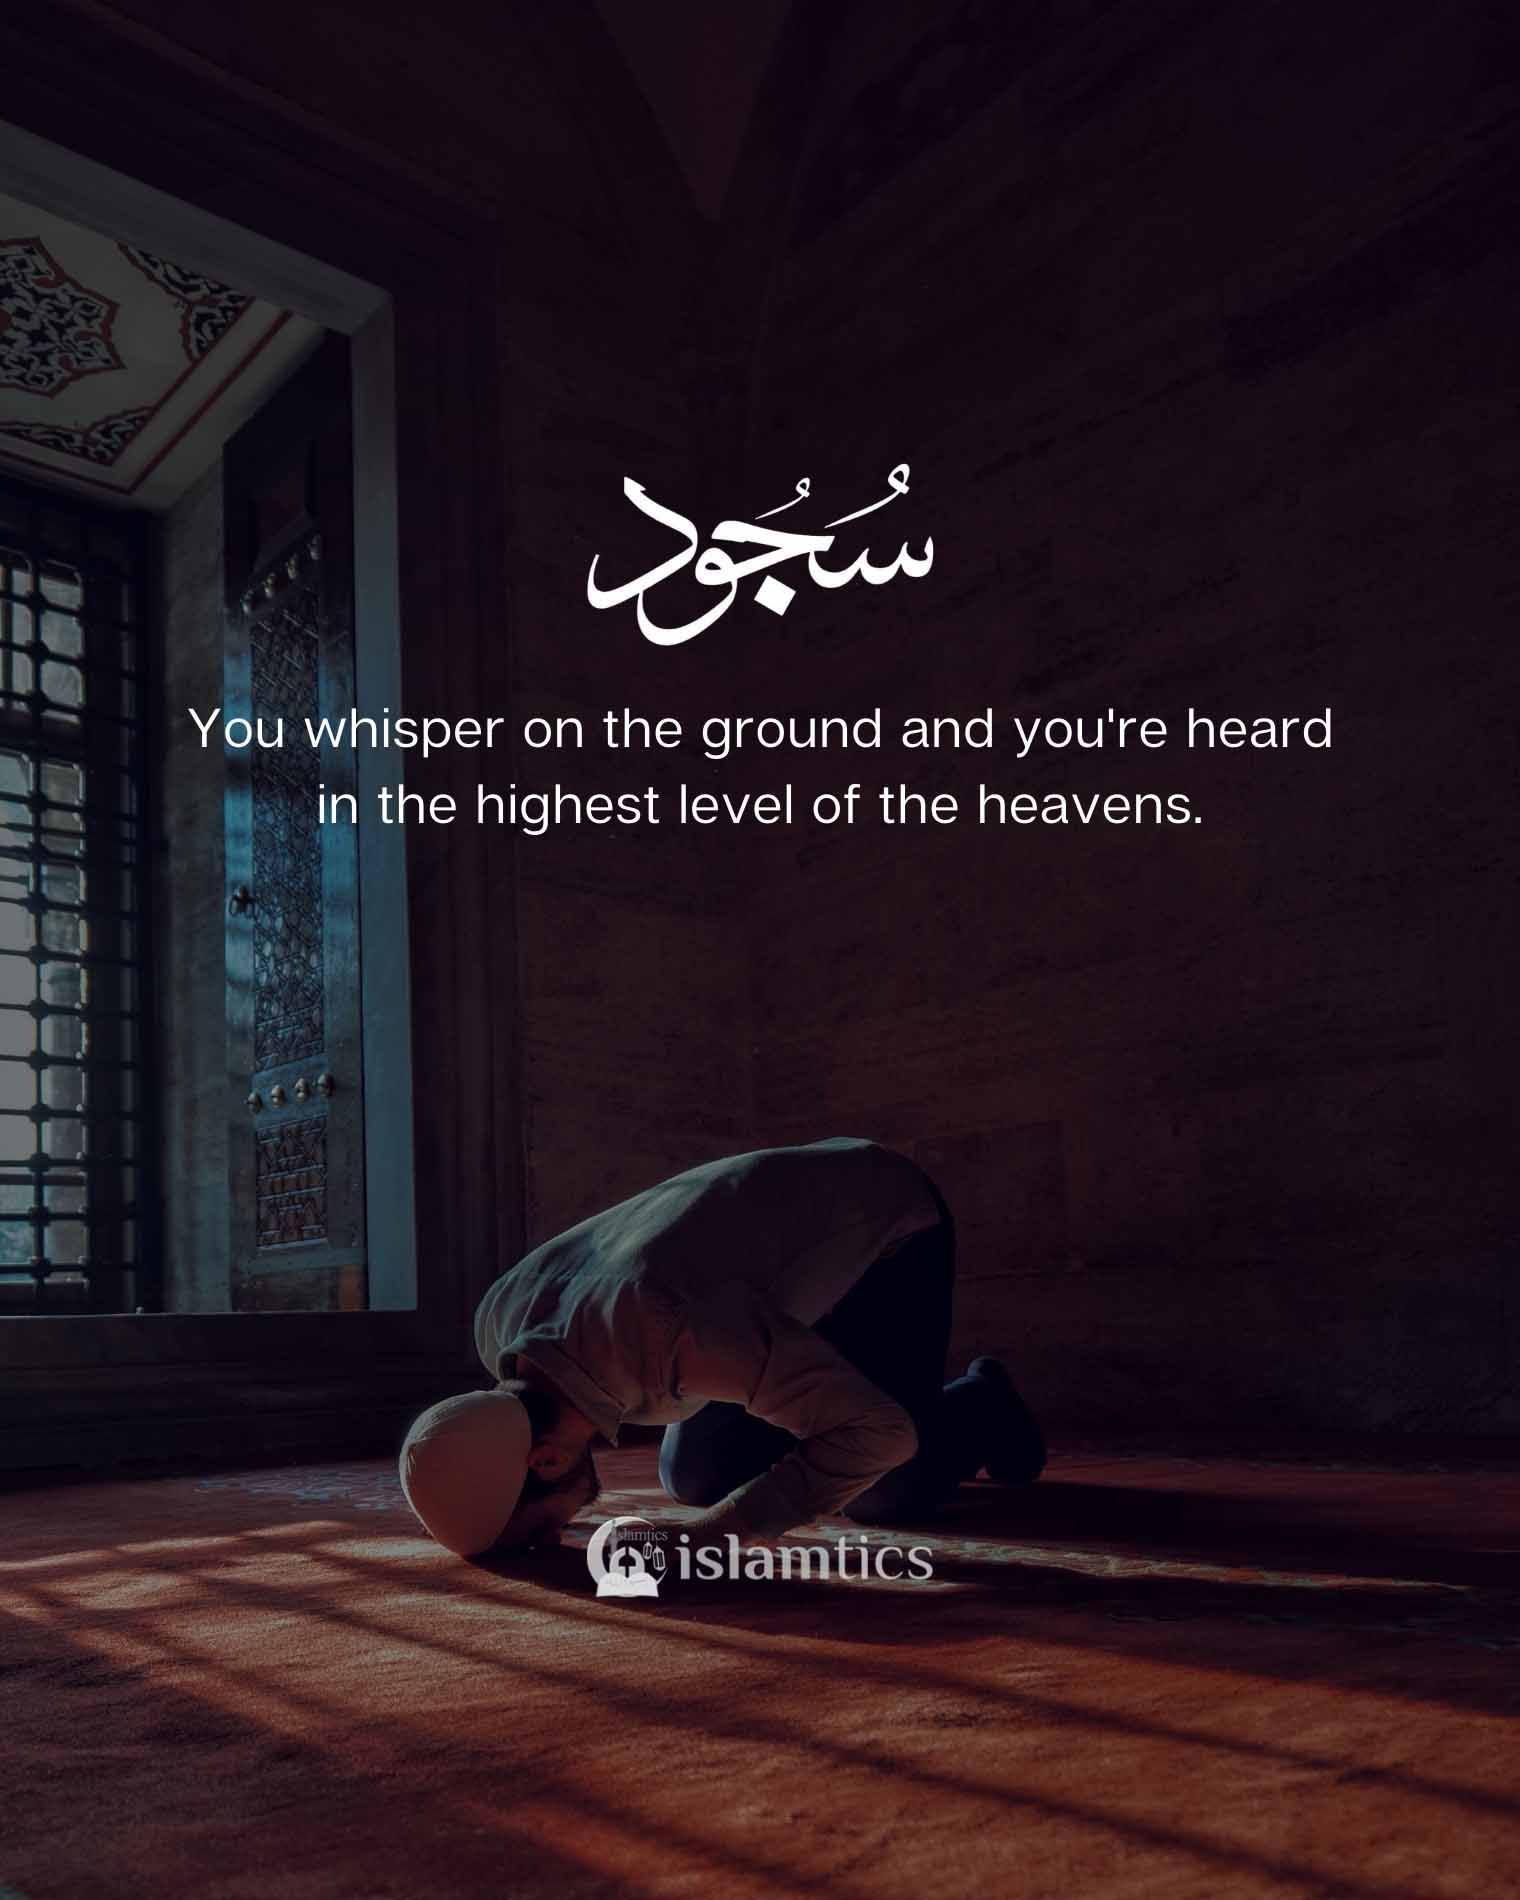  You whisper on the ground and you’re heard in the highest level of the heavens.